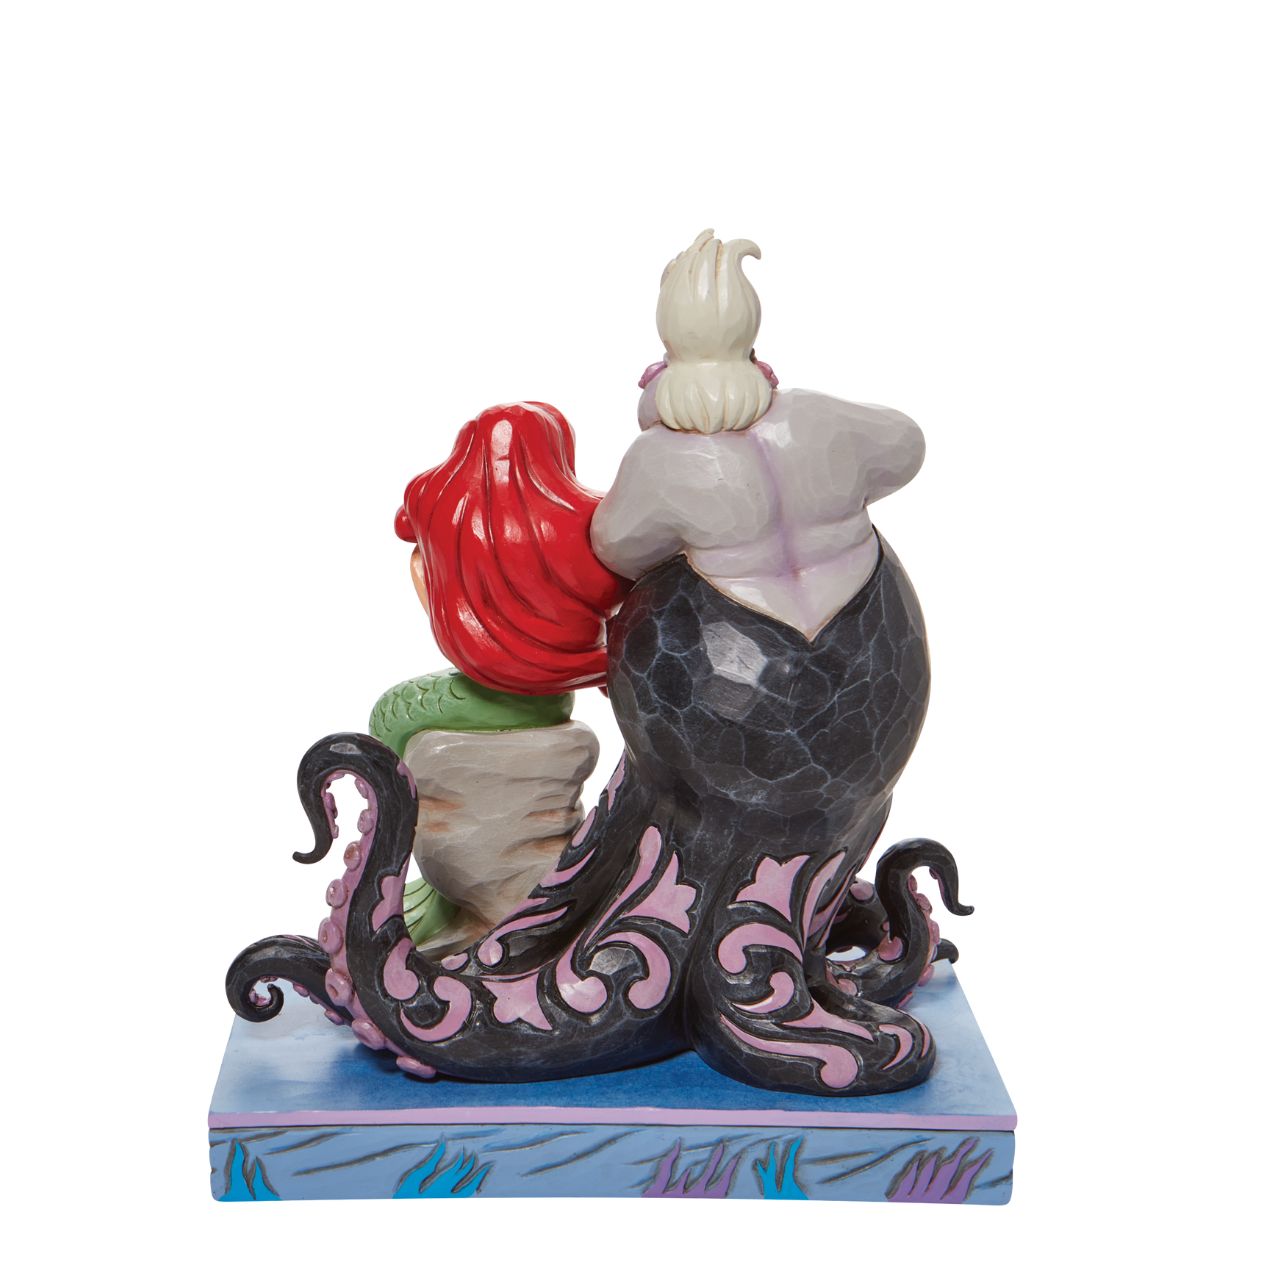 This Jim Shore piece ventures under the sea to share a scene of good and evil. Smiling innocently, Ariel, the little mermaid, sits on a stump as the sea witch, Ursula, connives cruelly behind her shoulder. Packaged in a branded gift box.